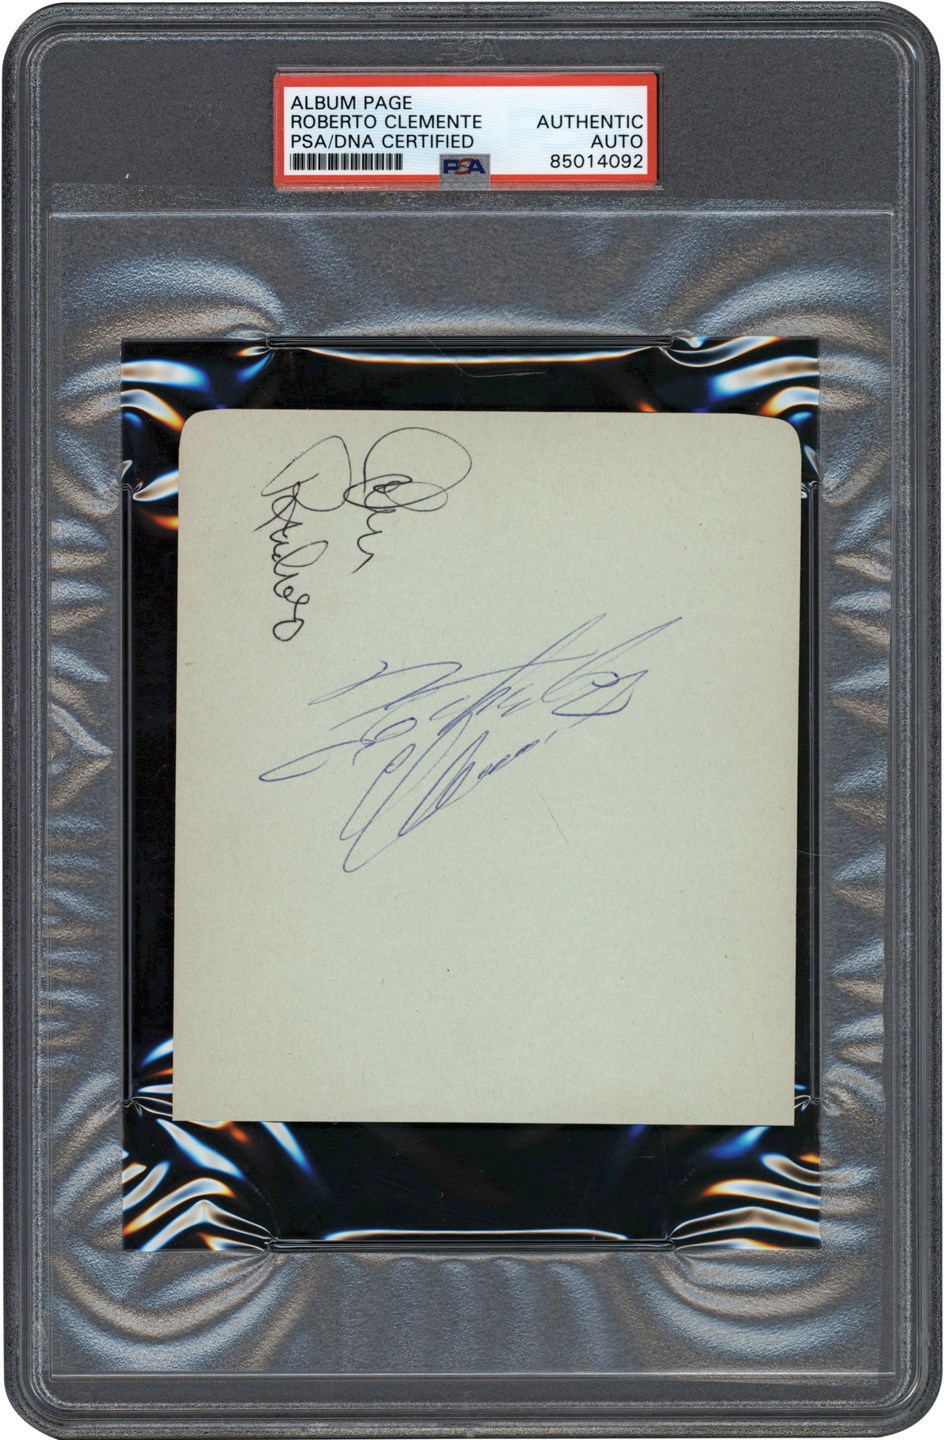 Clemente and Pittsburgh Pirates - Roberto Clemente Signed Album Page (PSA)